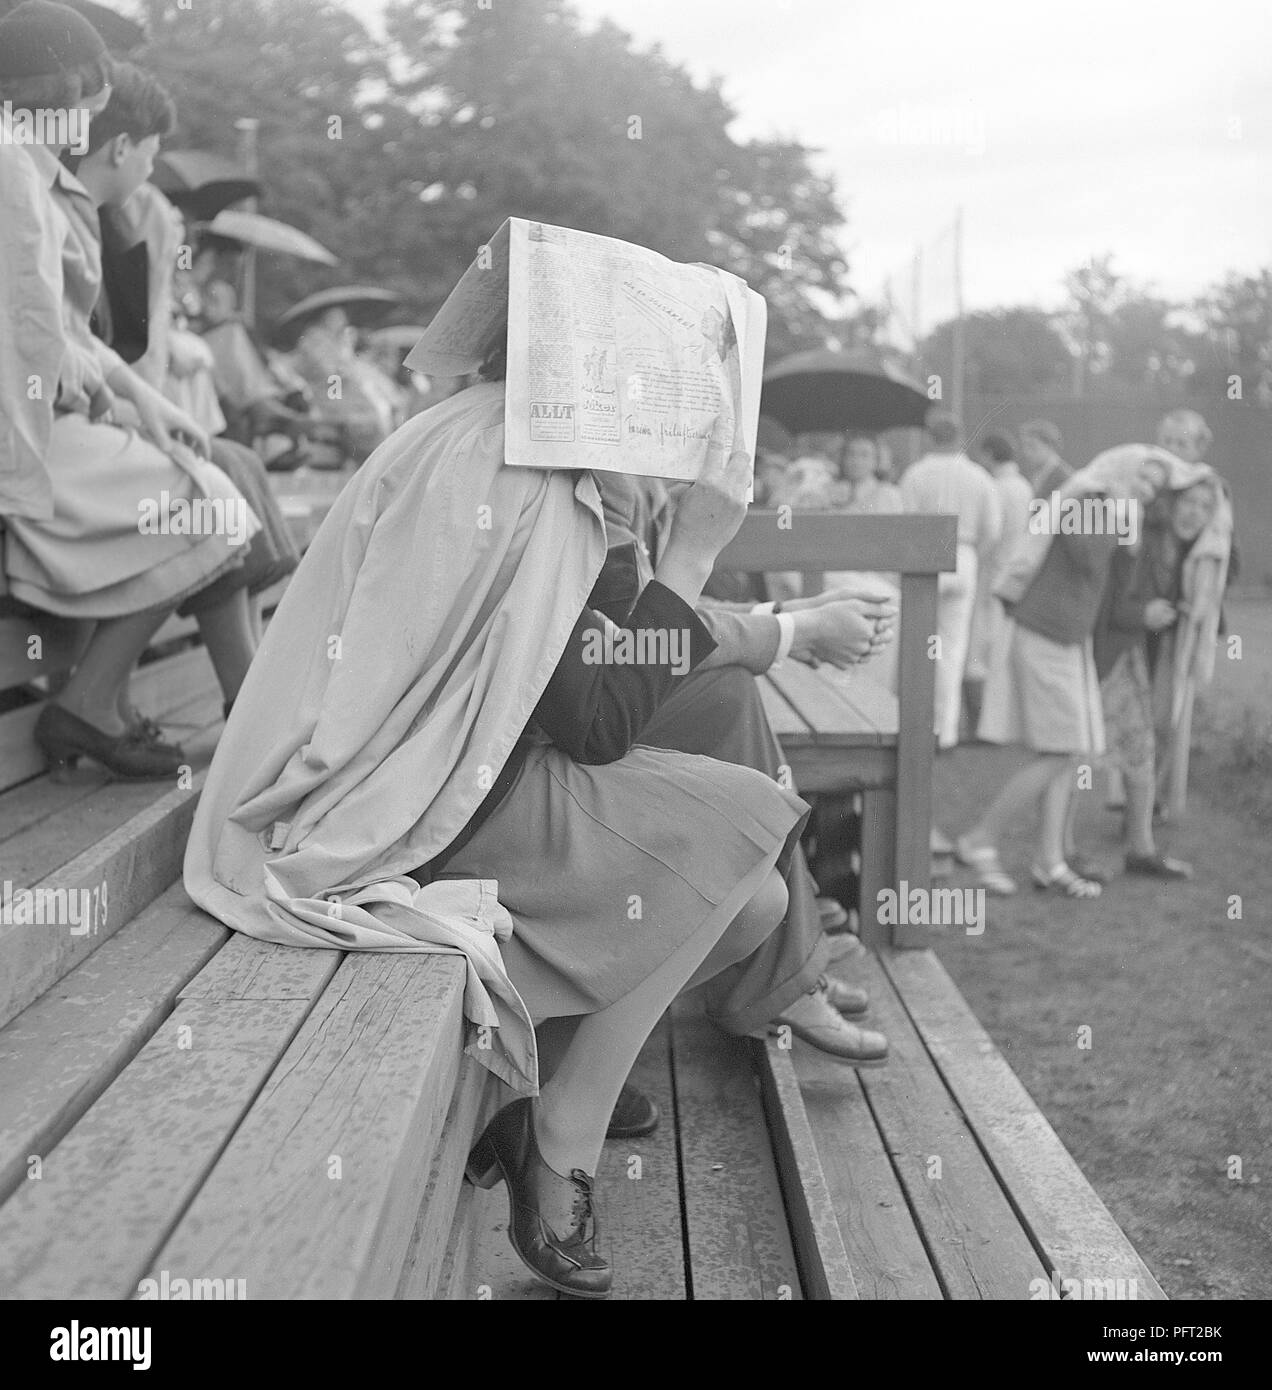 1940s woman in the rain. A  woman covers her head with a newspaper to avoid getting wet in the rainy weather. Sweden 1940s ref K48-3 Stock Photo